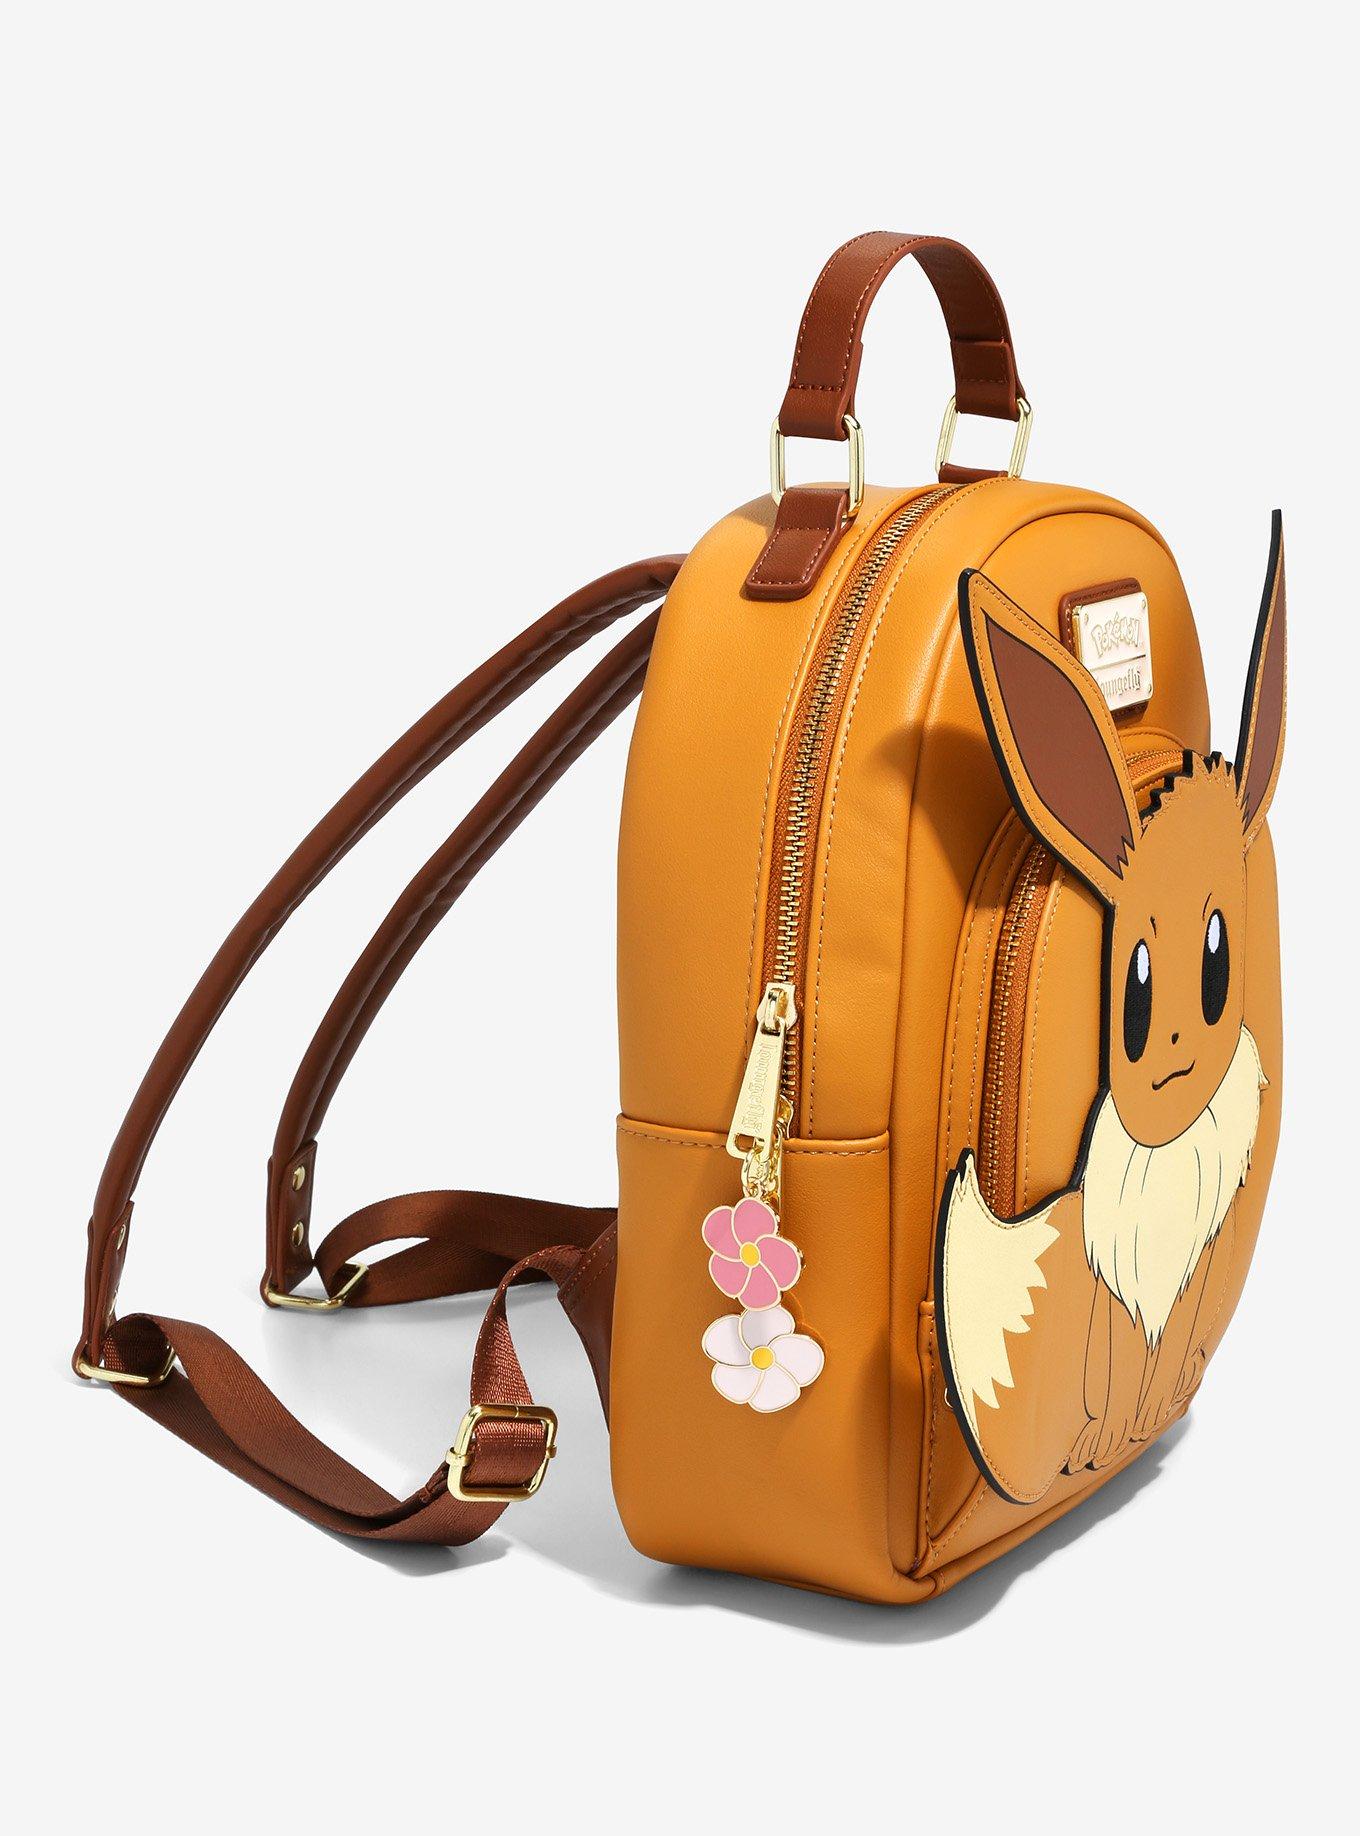 Pokémon Kanto Starter Mini-Backpack by LOUNGEFLY 2022 Exclusive